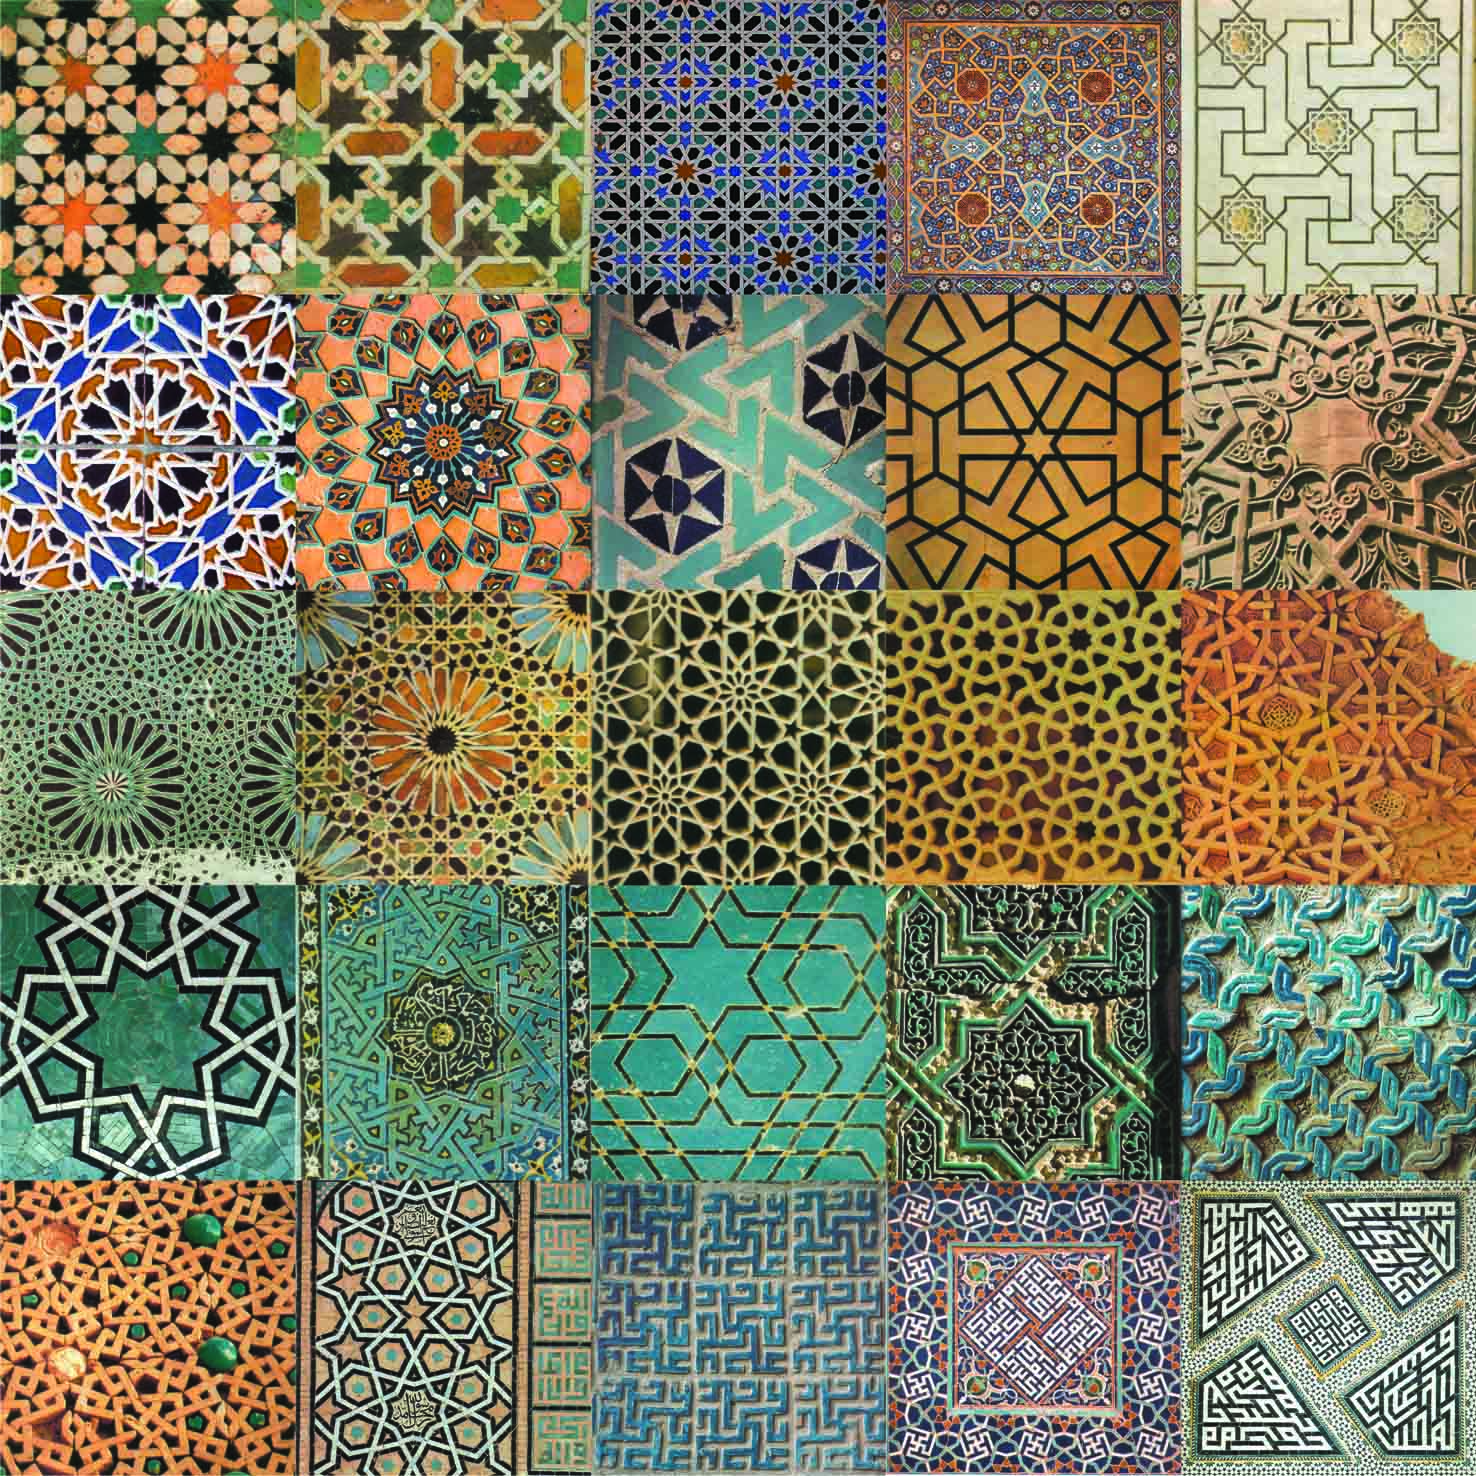 Islamic Patterns | How to become an Architect | Page 3